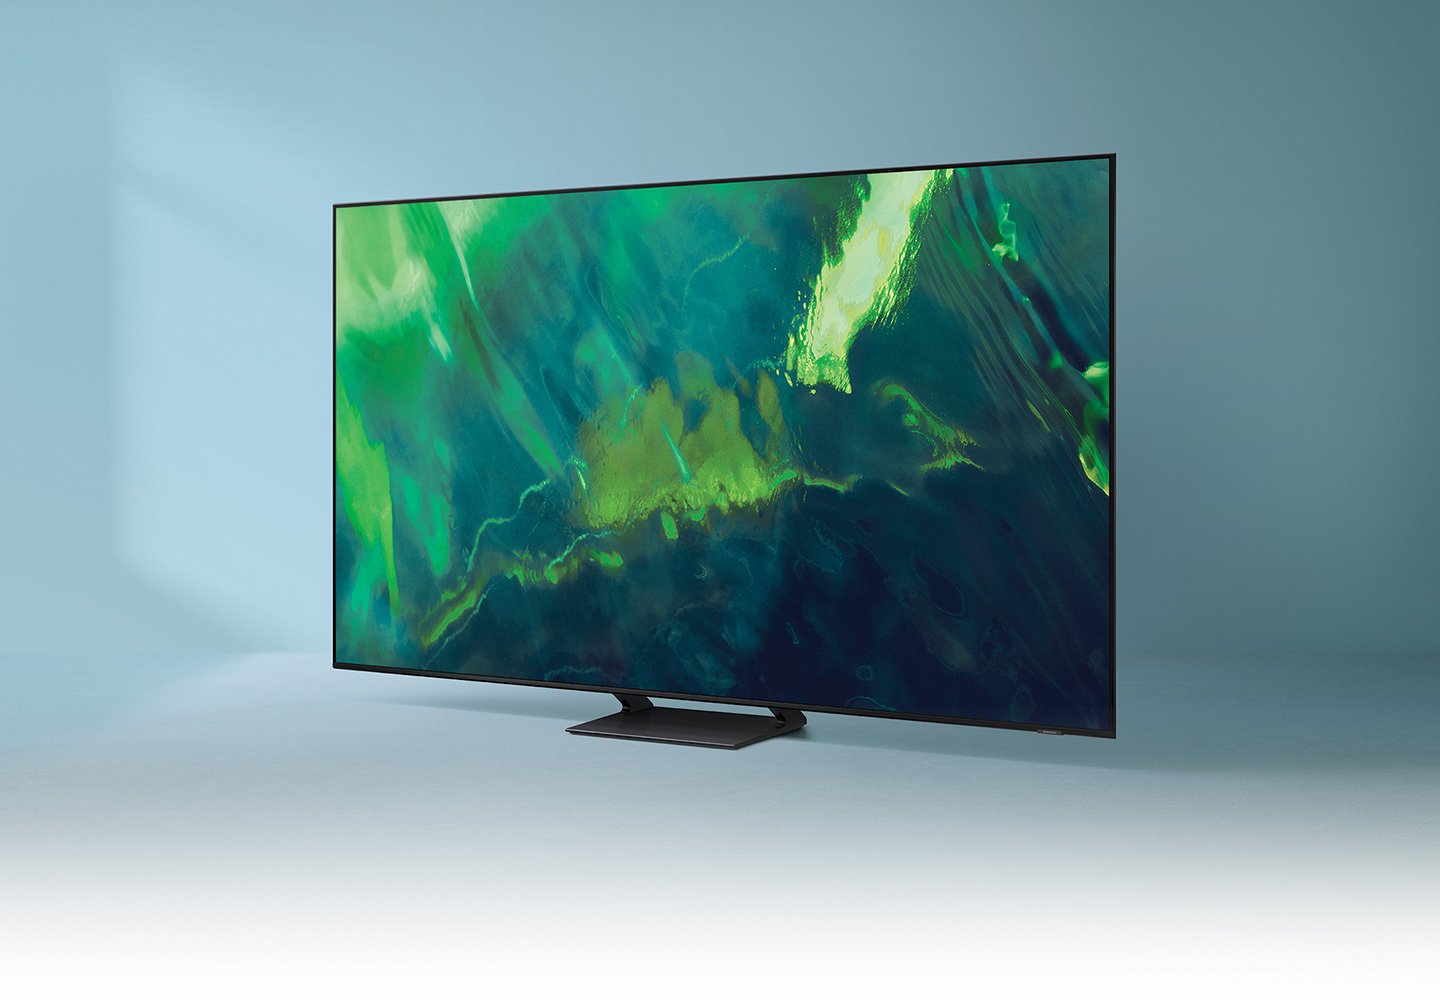 Samsung Q70A TV with green abstract screensaver on blue backdrop